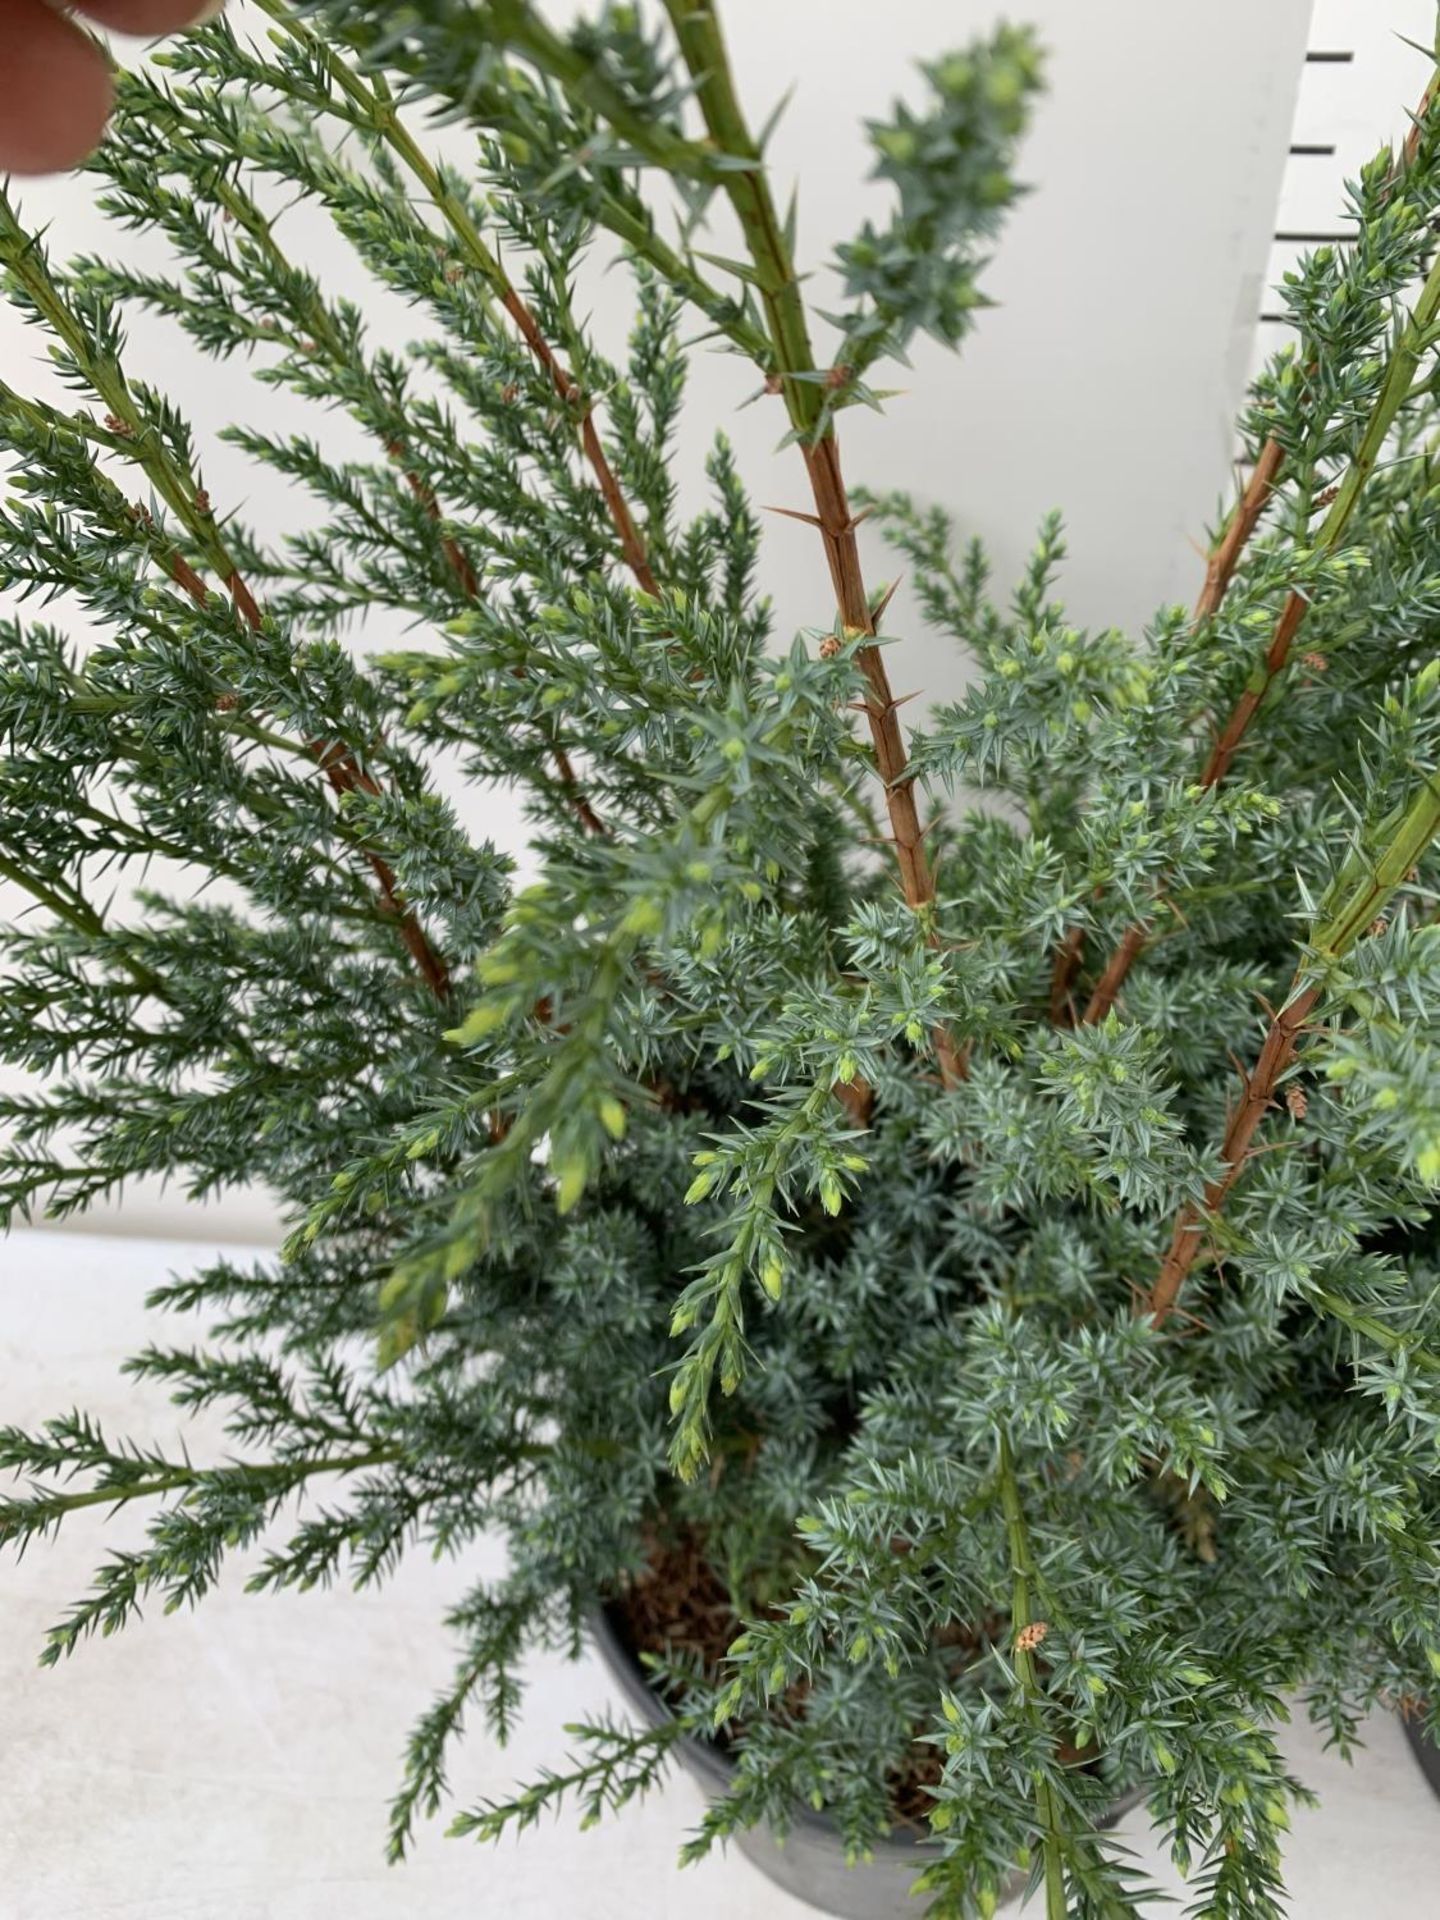 TWO JUNIPERUS CHINENSIS BLUE ALPS IN 7 LTR POTS A METRE IN HEIGHT PLUS VAT TO BE SOLD FOR THE TWO - Bild 5 aus 11